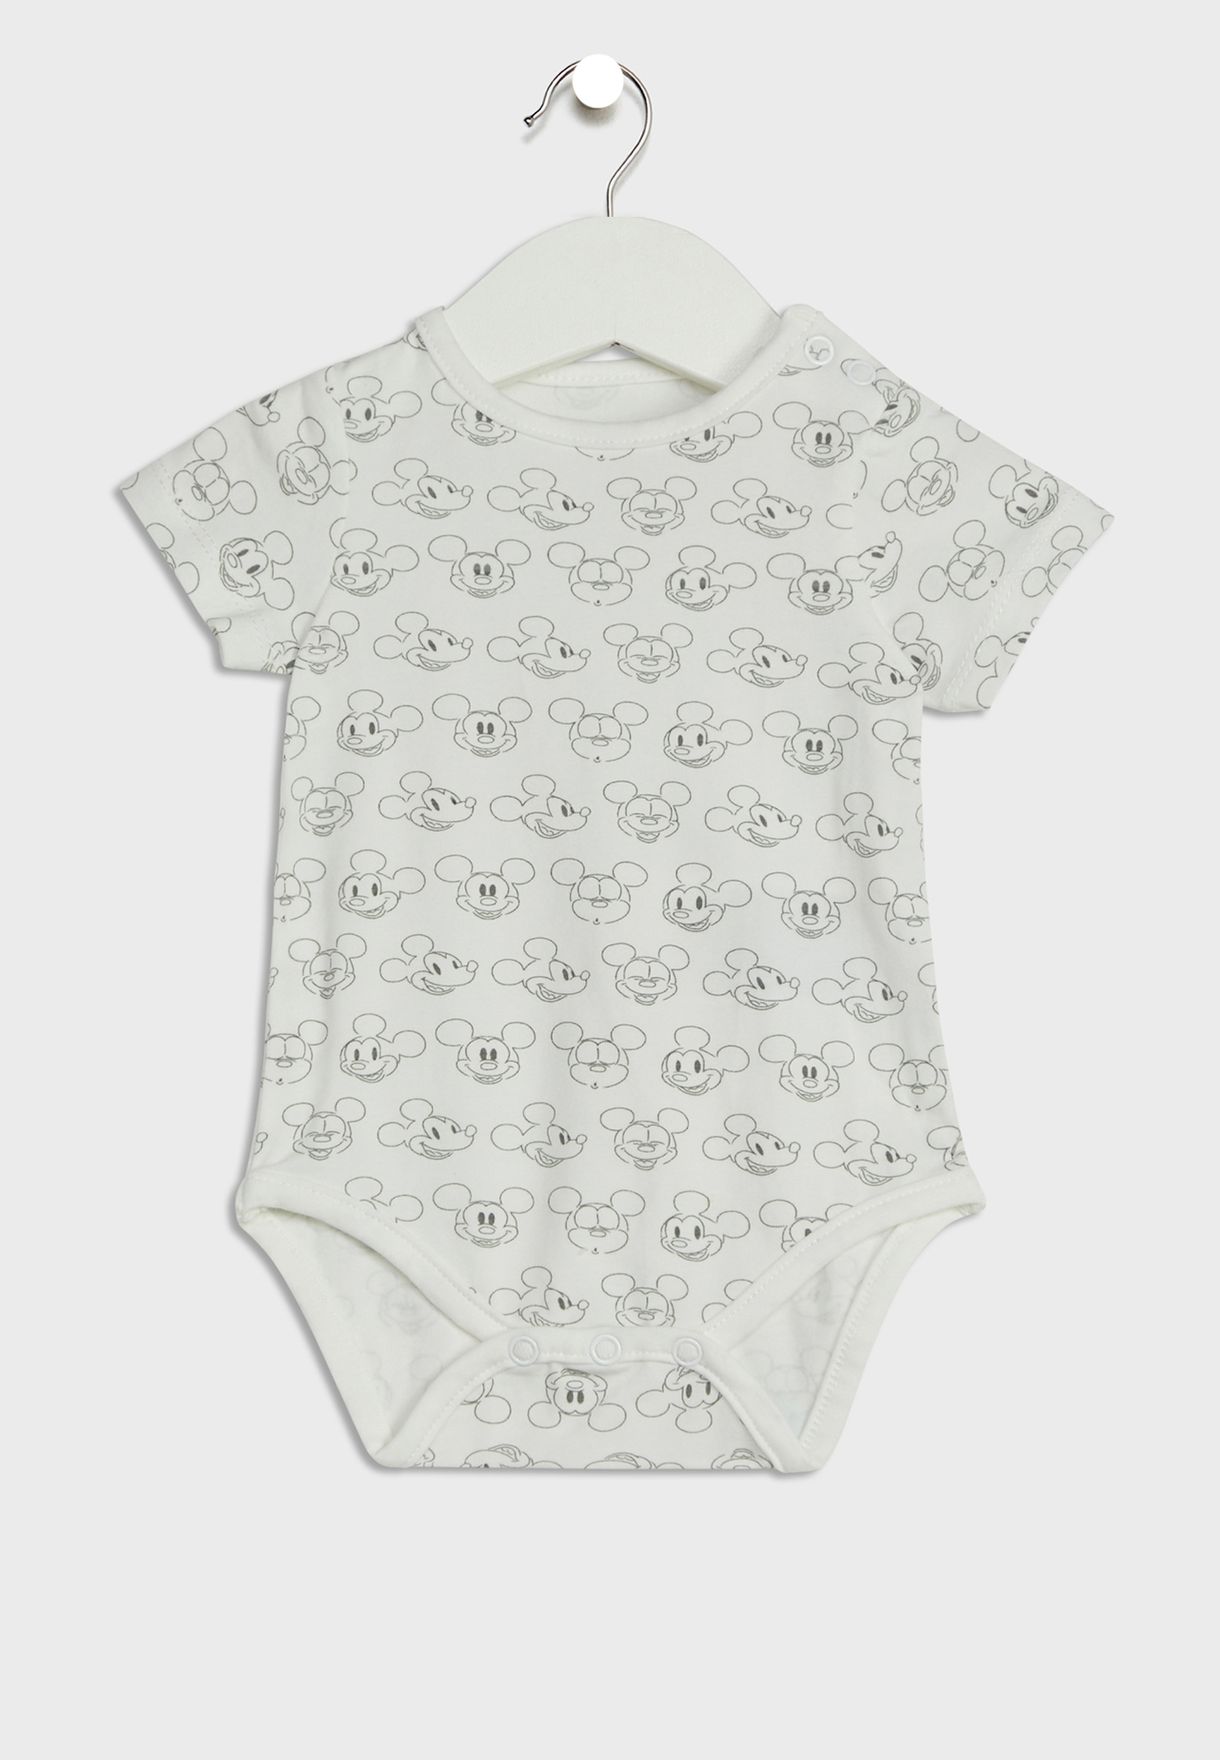 Infant Mickey Mouse T-Shirt + Dungaree Set